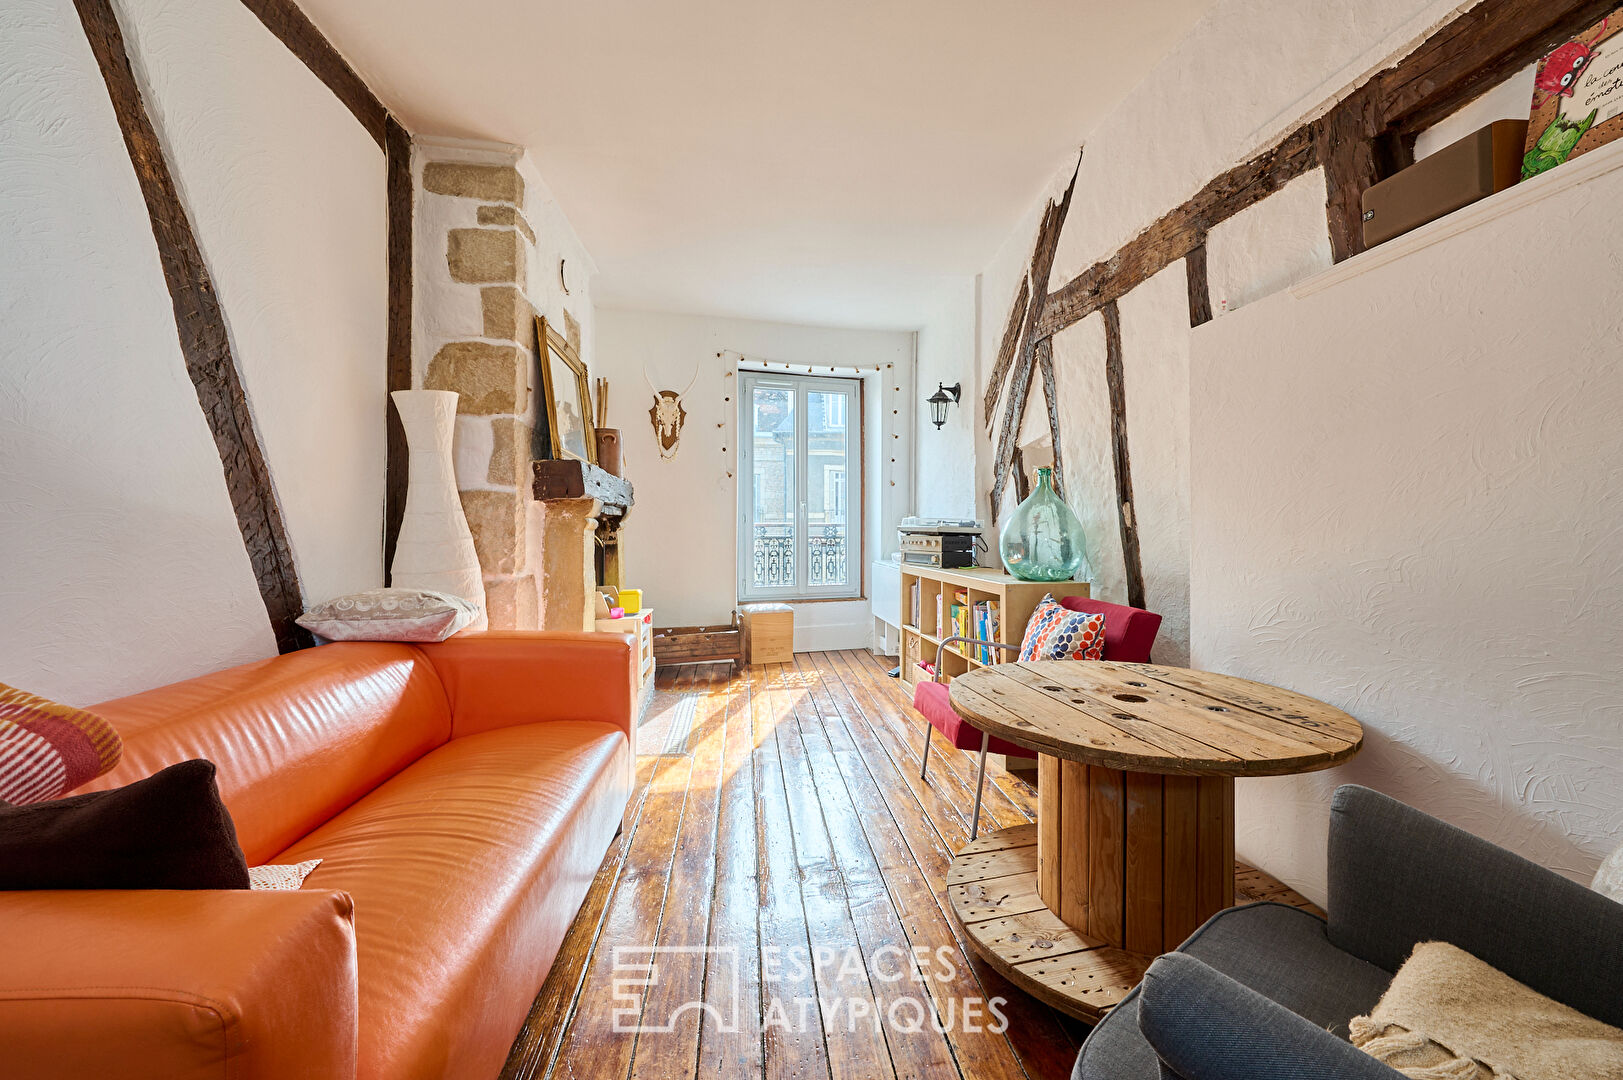 Atypical apartment in the heart of town